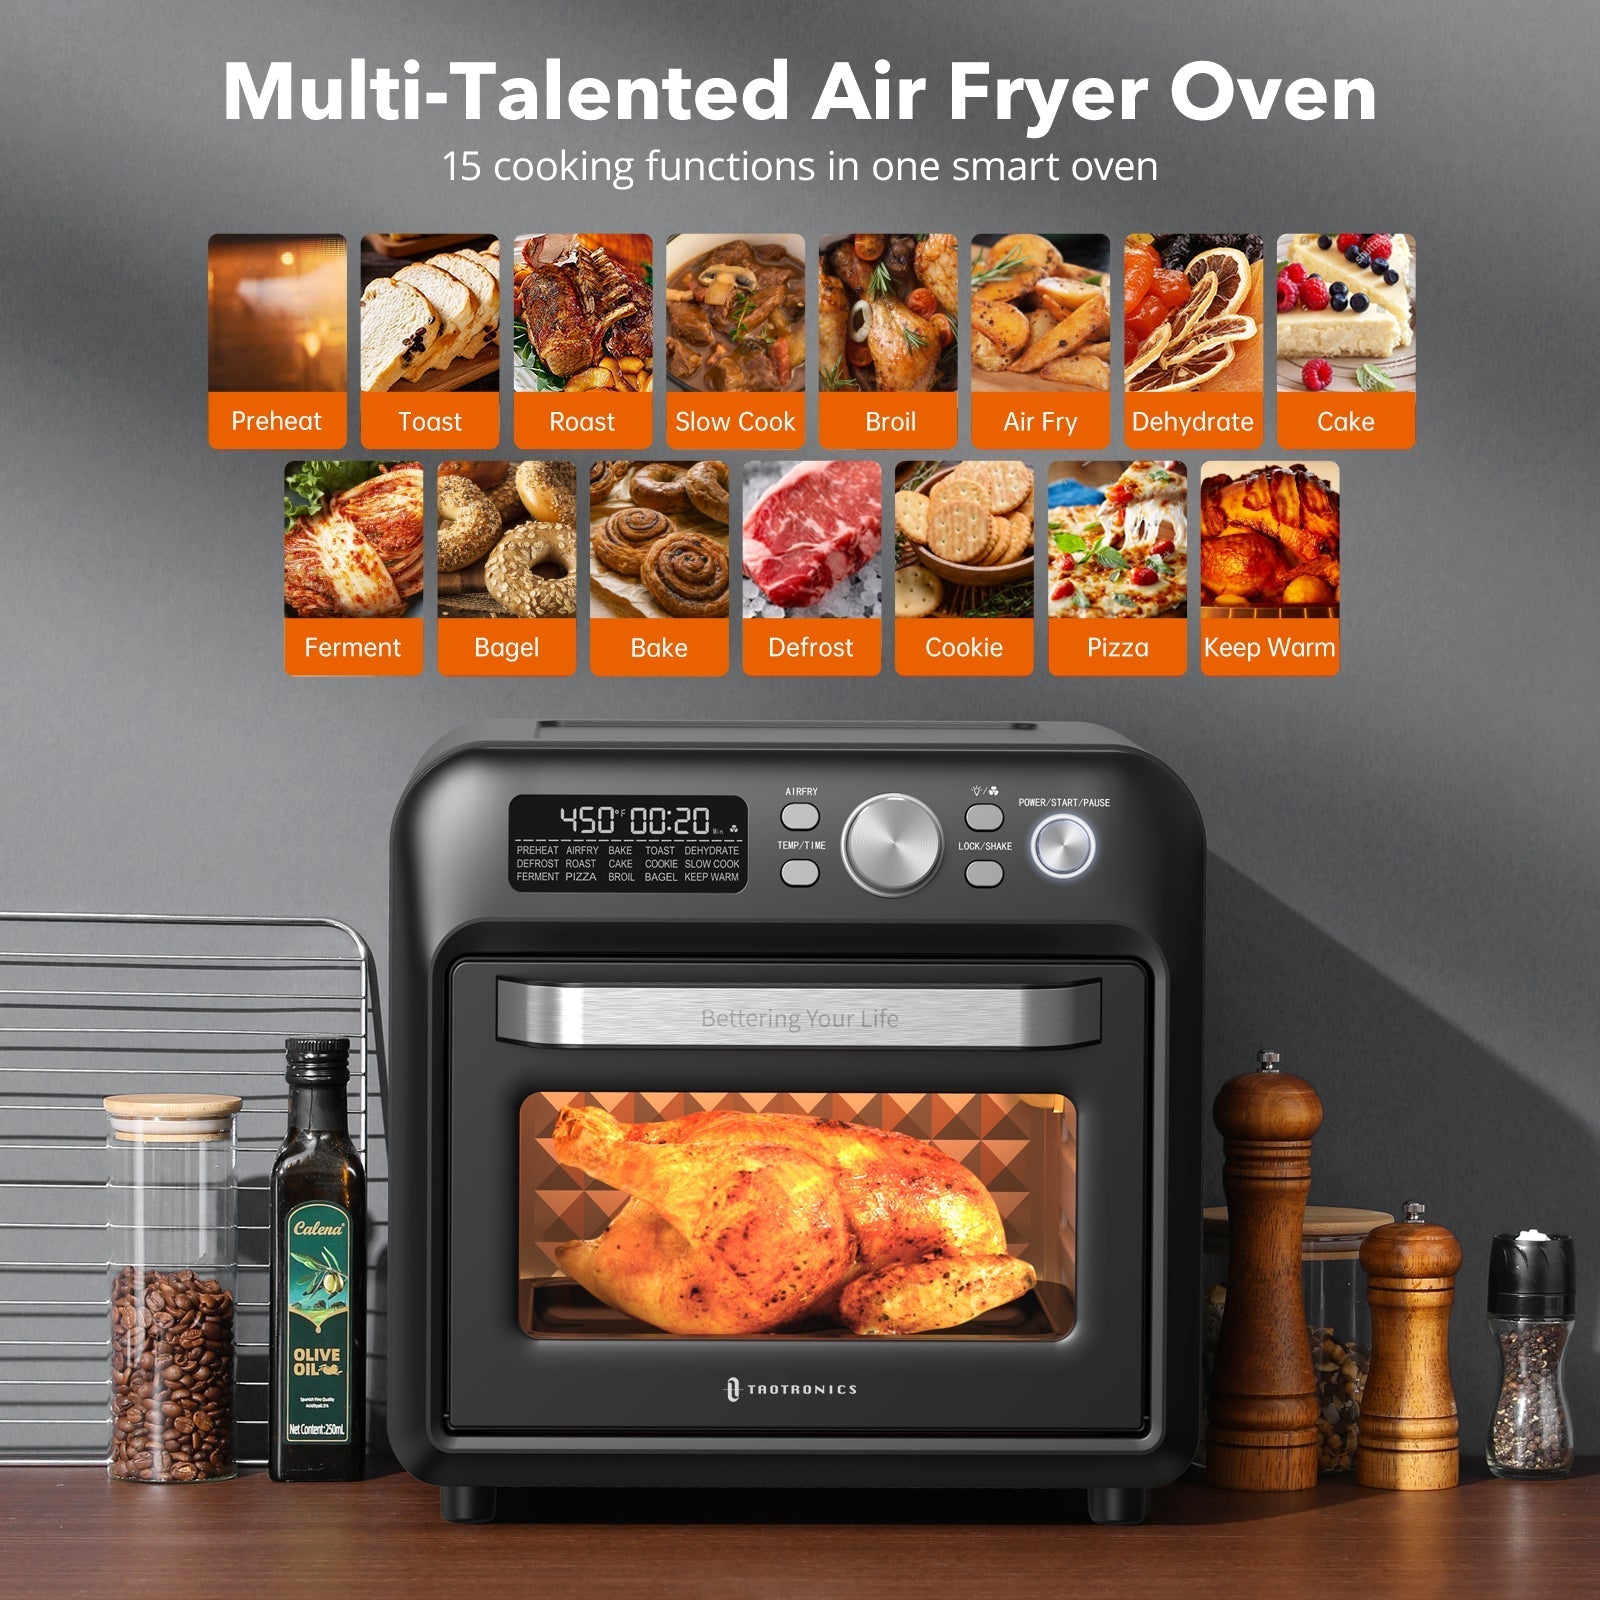 Taotronics Air Fryer 012, 19 Quart 15-in-1 Family-Sized Toaster Oven WM